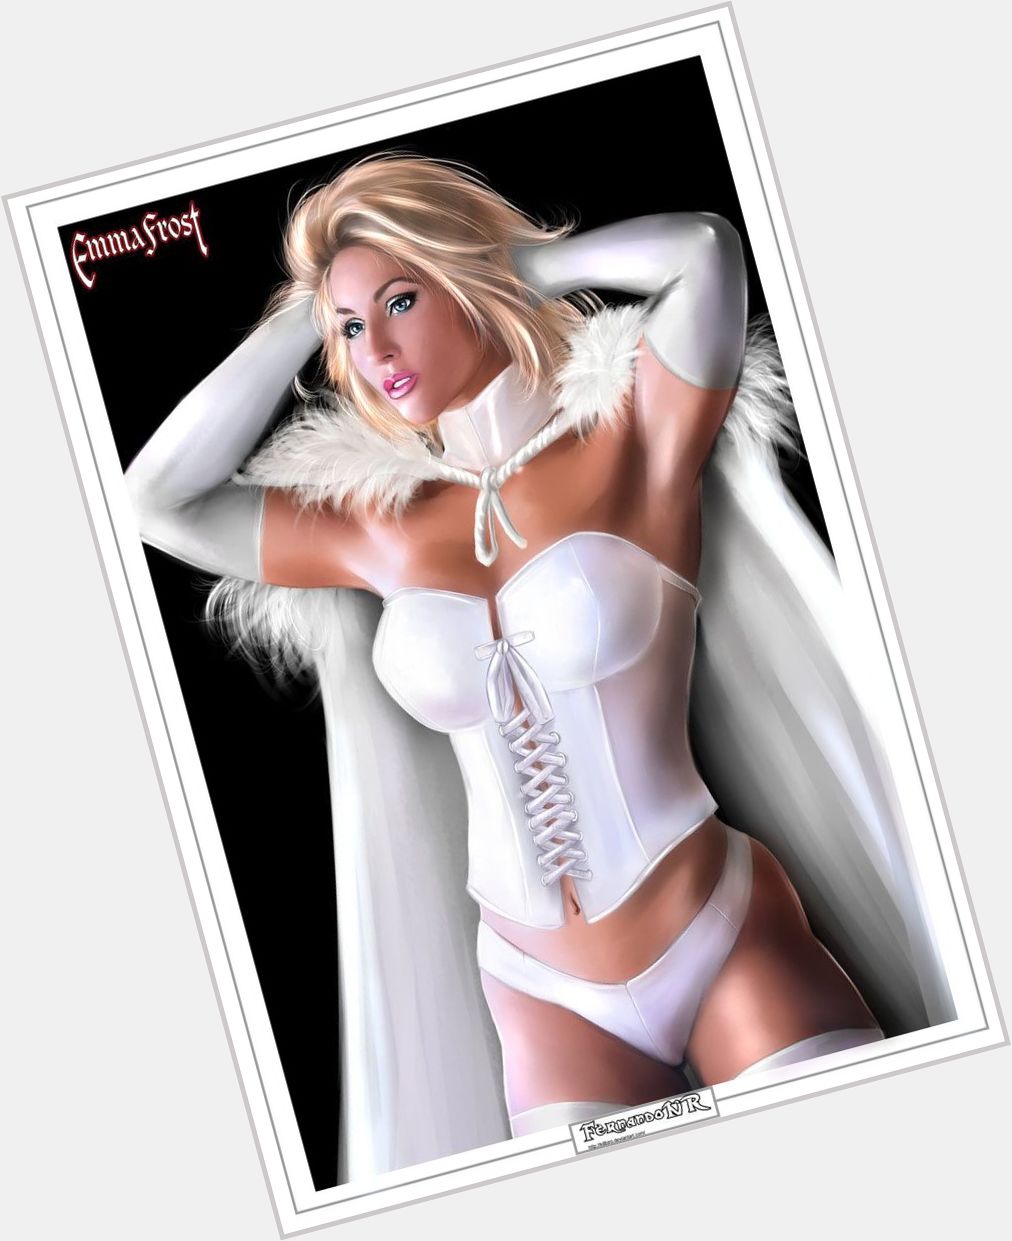 Emma Frost blonde hair & hairstyles Athletic body, 